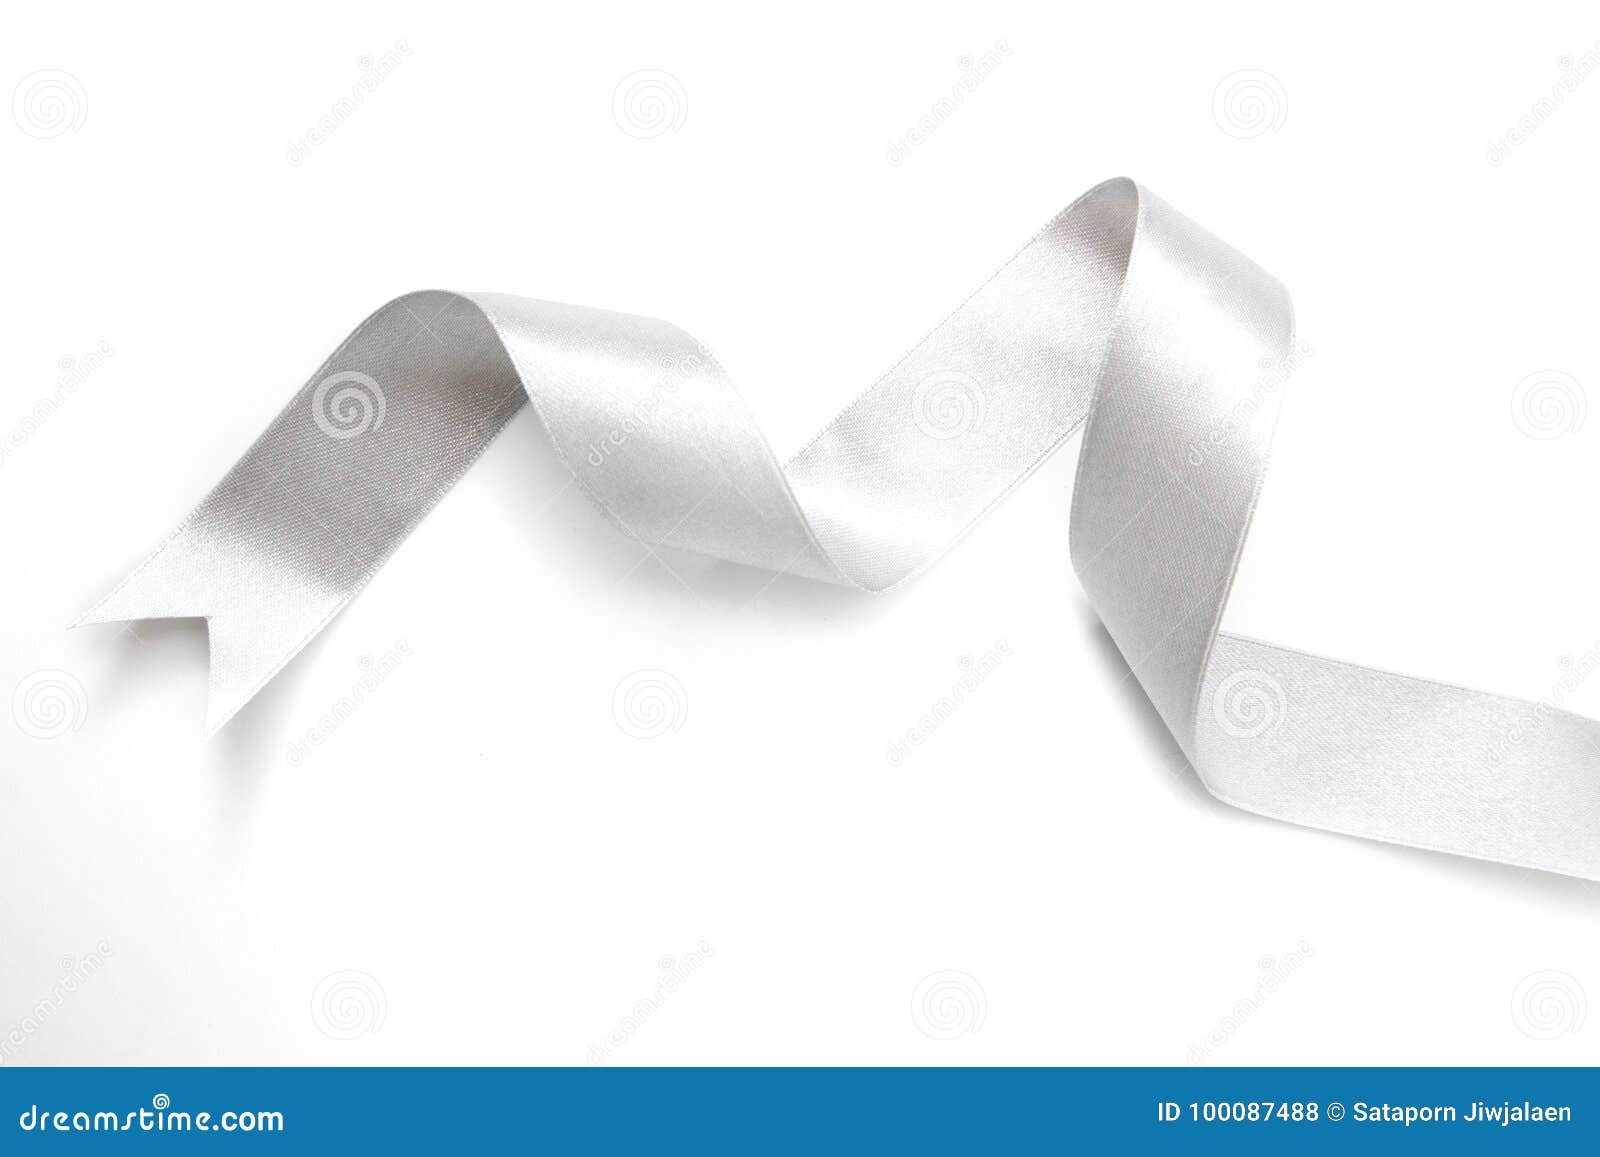 Silver Ribbon With Bow On White Background Stock Photo, Picture and Royalty  Free Image. Image 115473815.